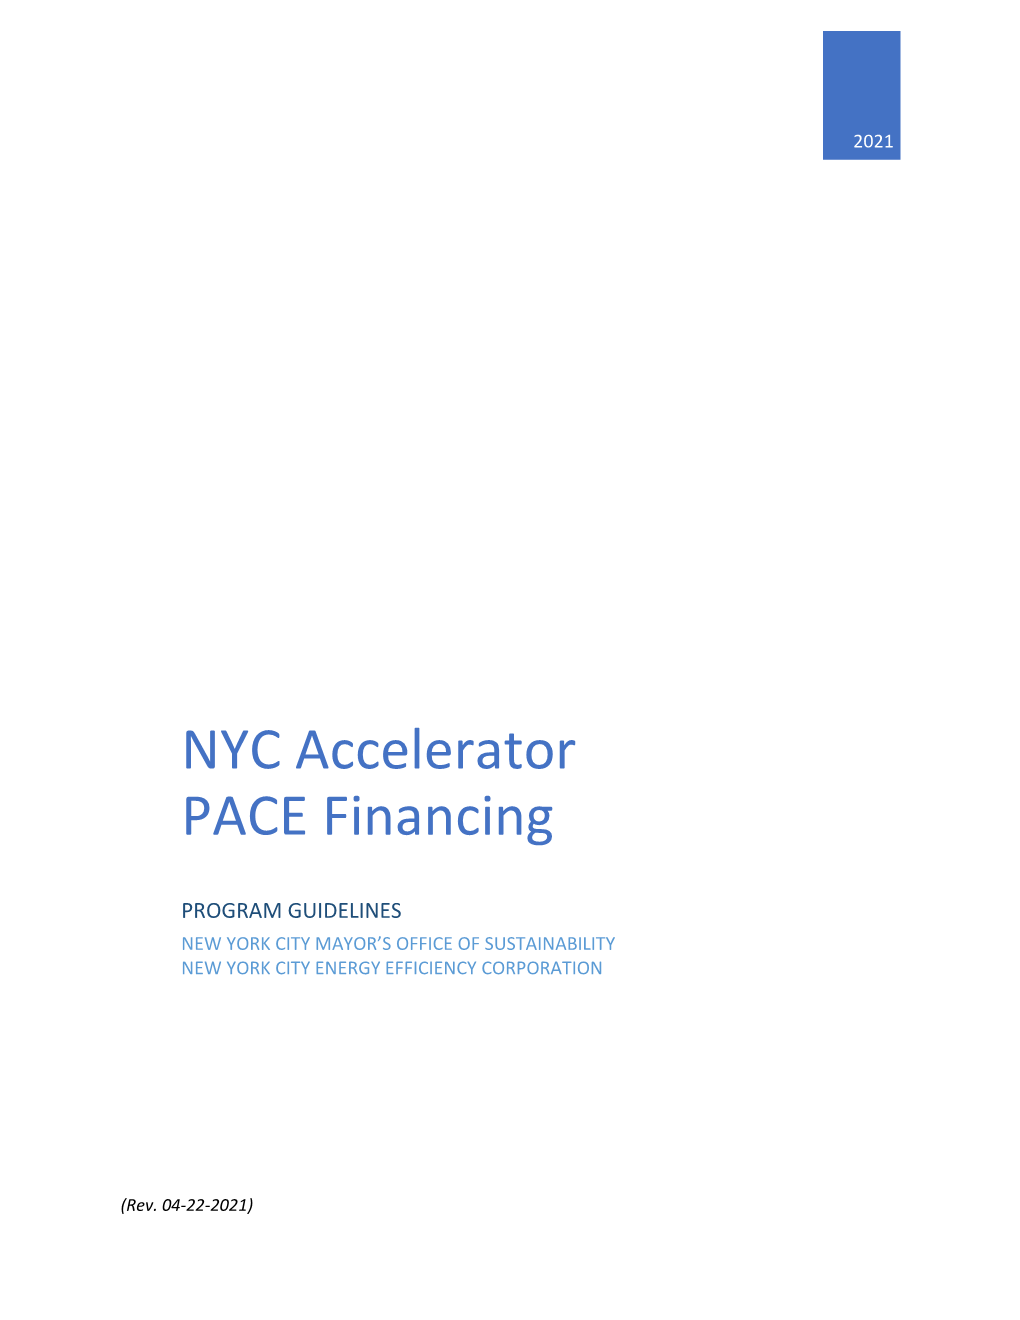 NYC Accelerator PACE Financing